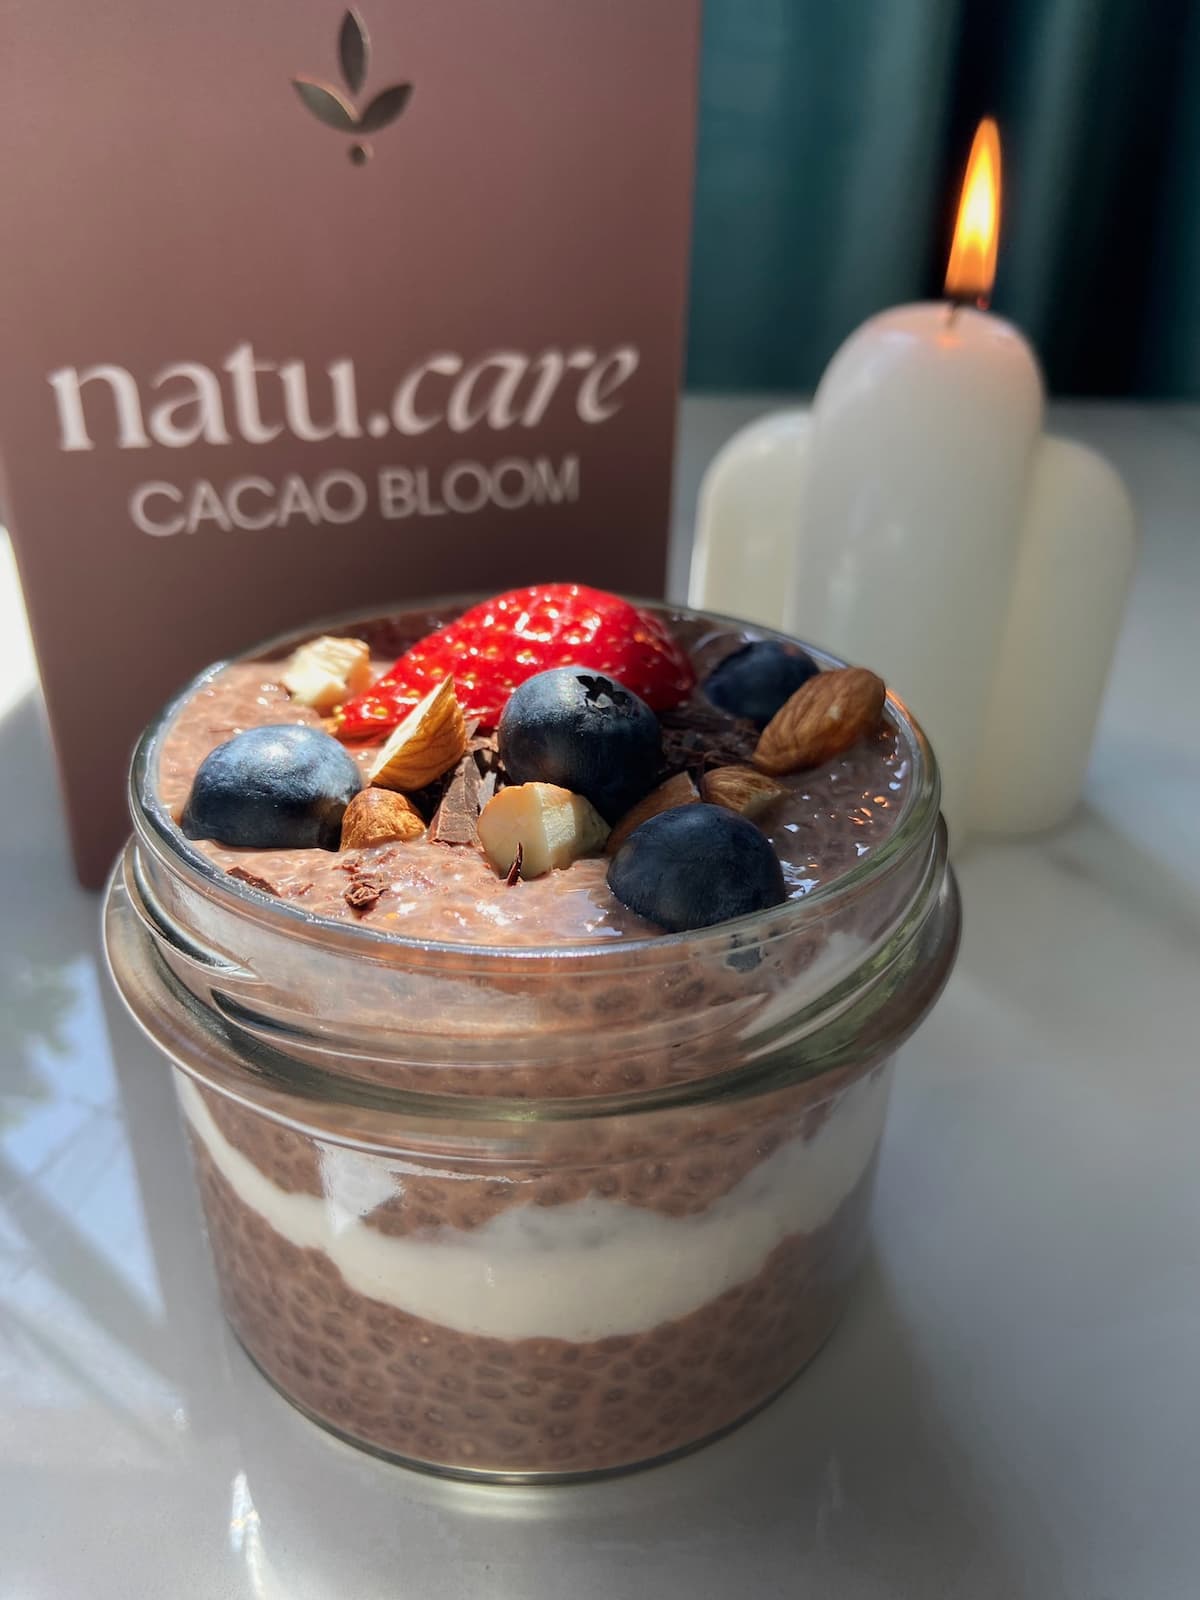 Collagen chia pudding - a dessert with 5g of collagen from a nutritionist